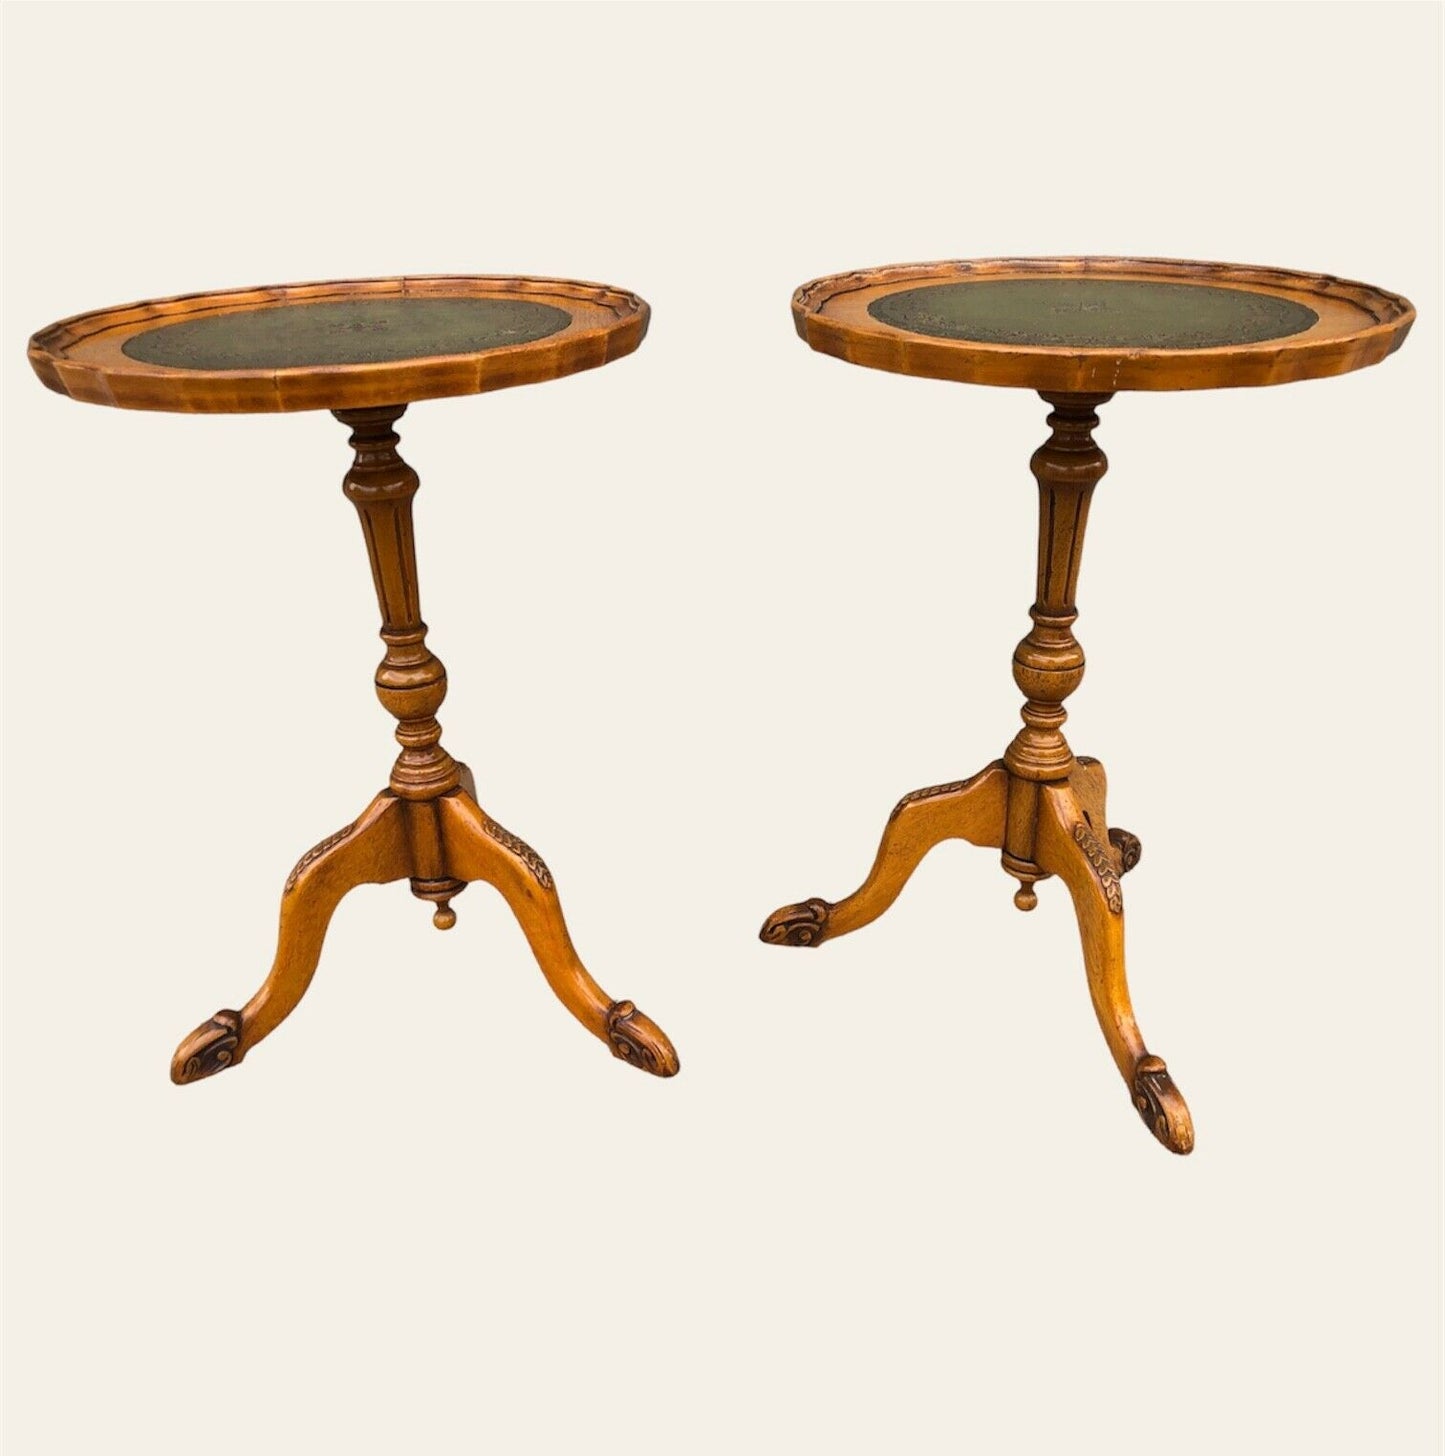 000955....A Handsome Pair Of Vintage Wine Tables / Occasional Tables ( Sold )